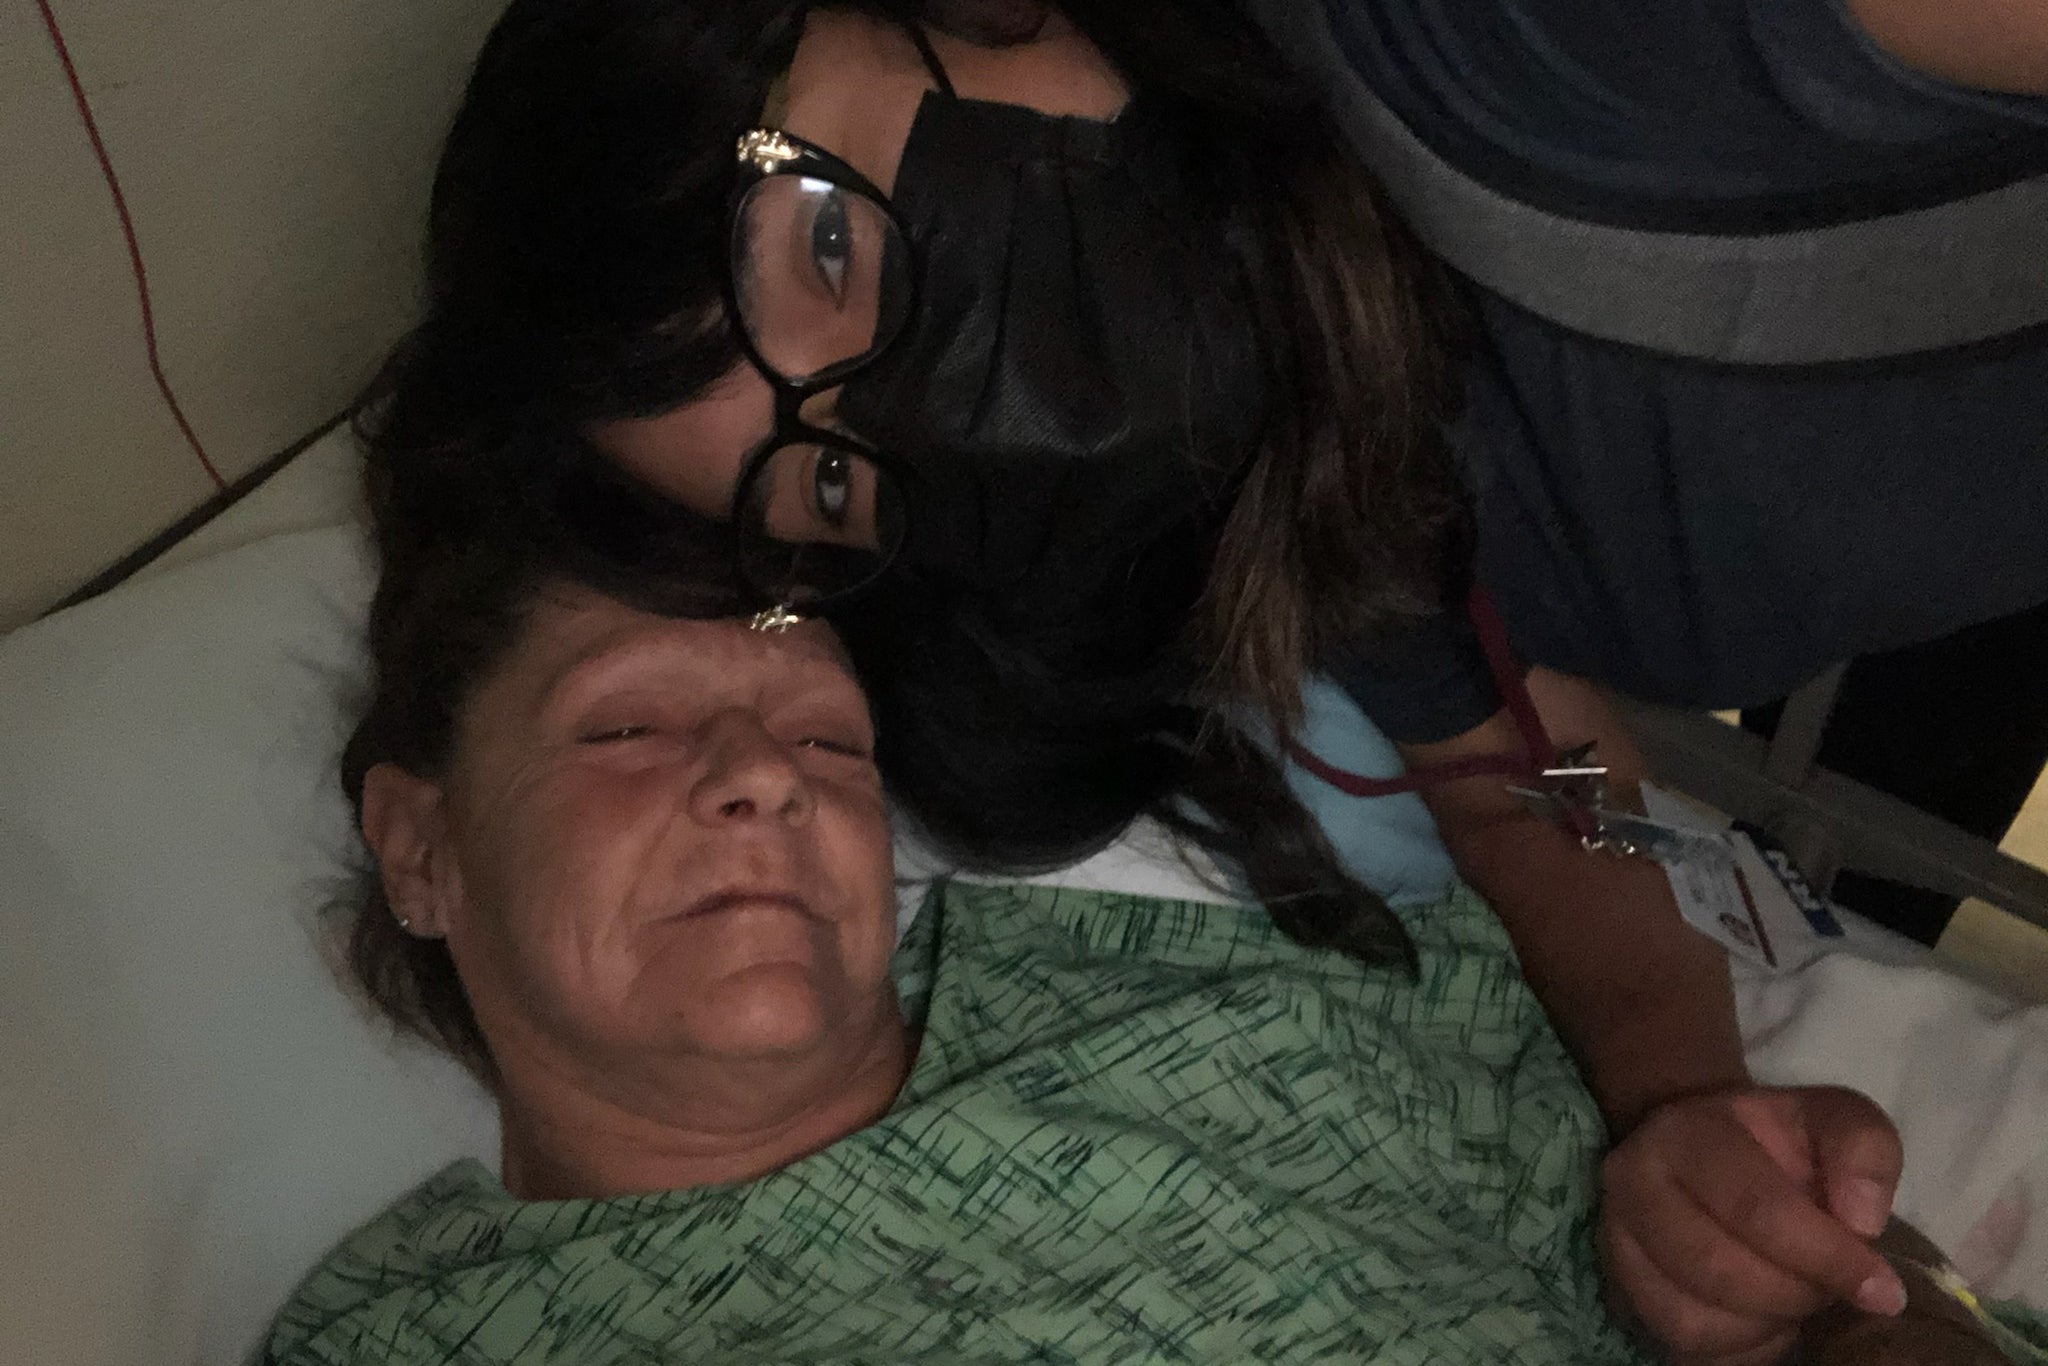 A masked nurse leans close to Denise, who is lying in a hospital bed.